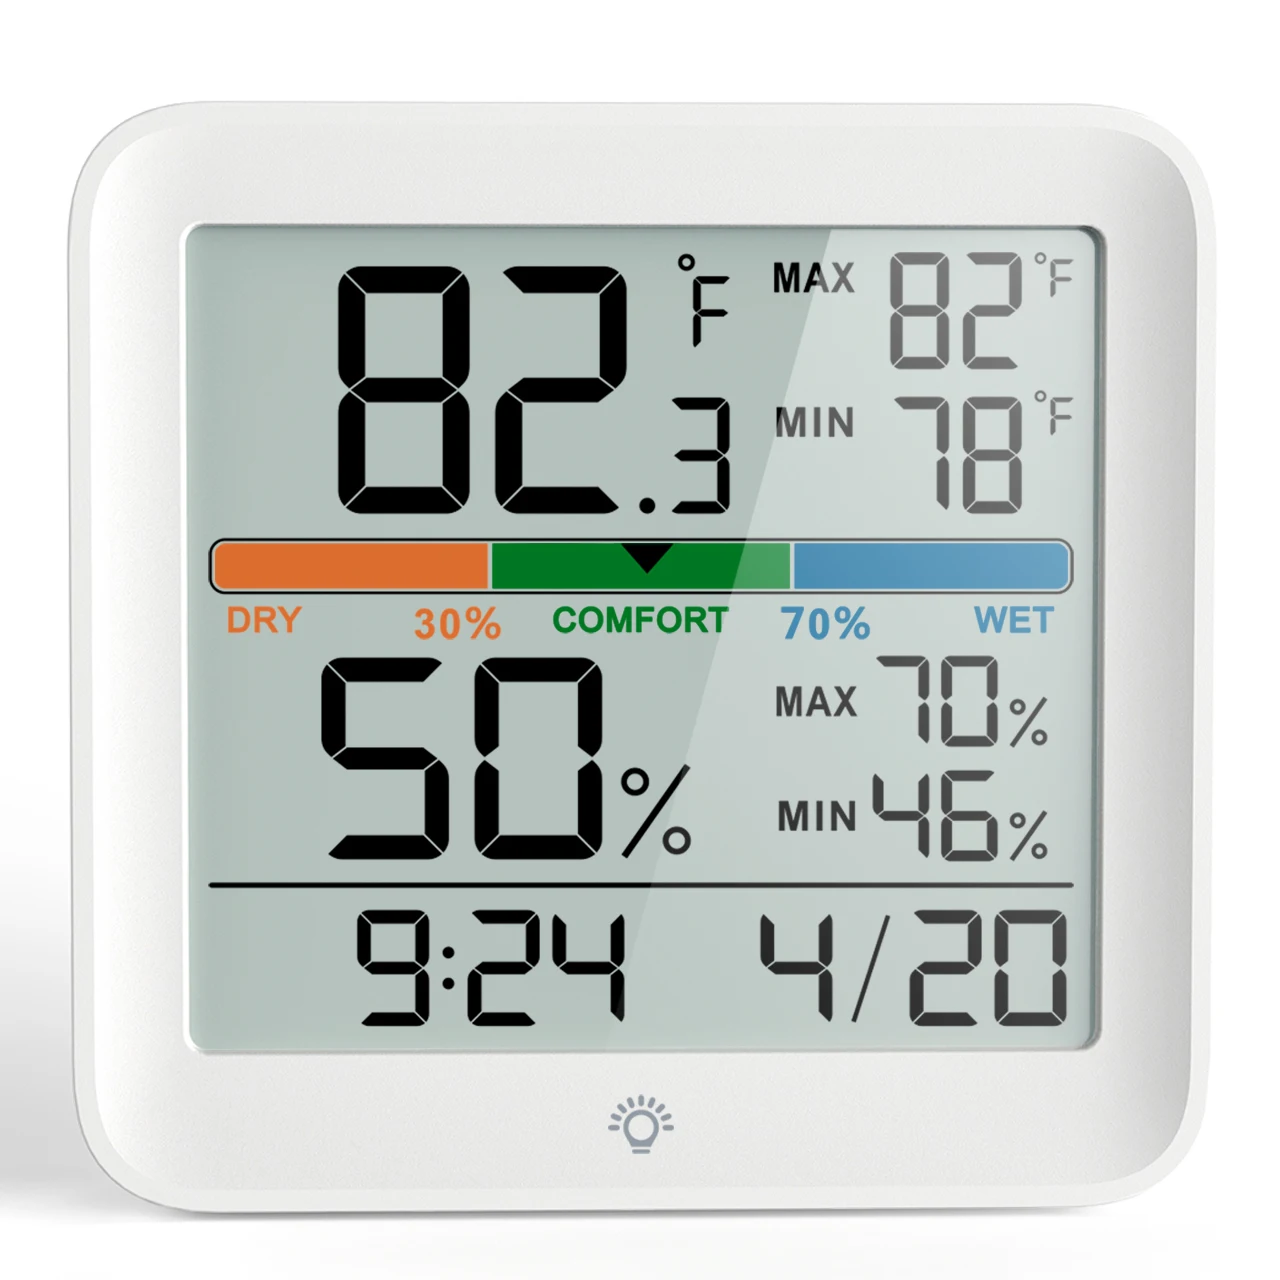 https://ae01.alicdn.com/kf/S8ca7967abf194d4fb7c32822bd322bcc1/Miiiw-Mute-Temperature-And-Humidity-Clock-Home-Indoor-High-precision-Baby-Room-Temperature-Monitor-LCD-backlight.jpg